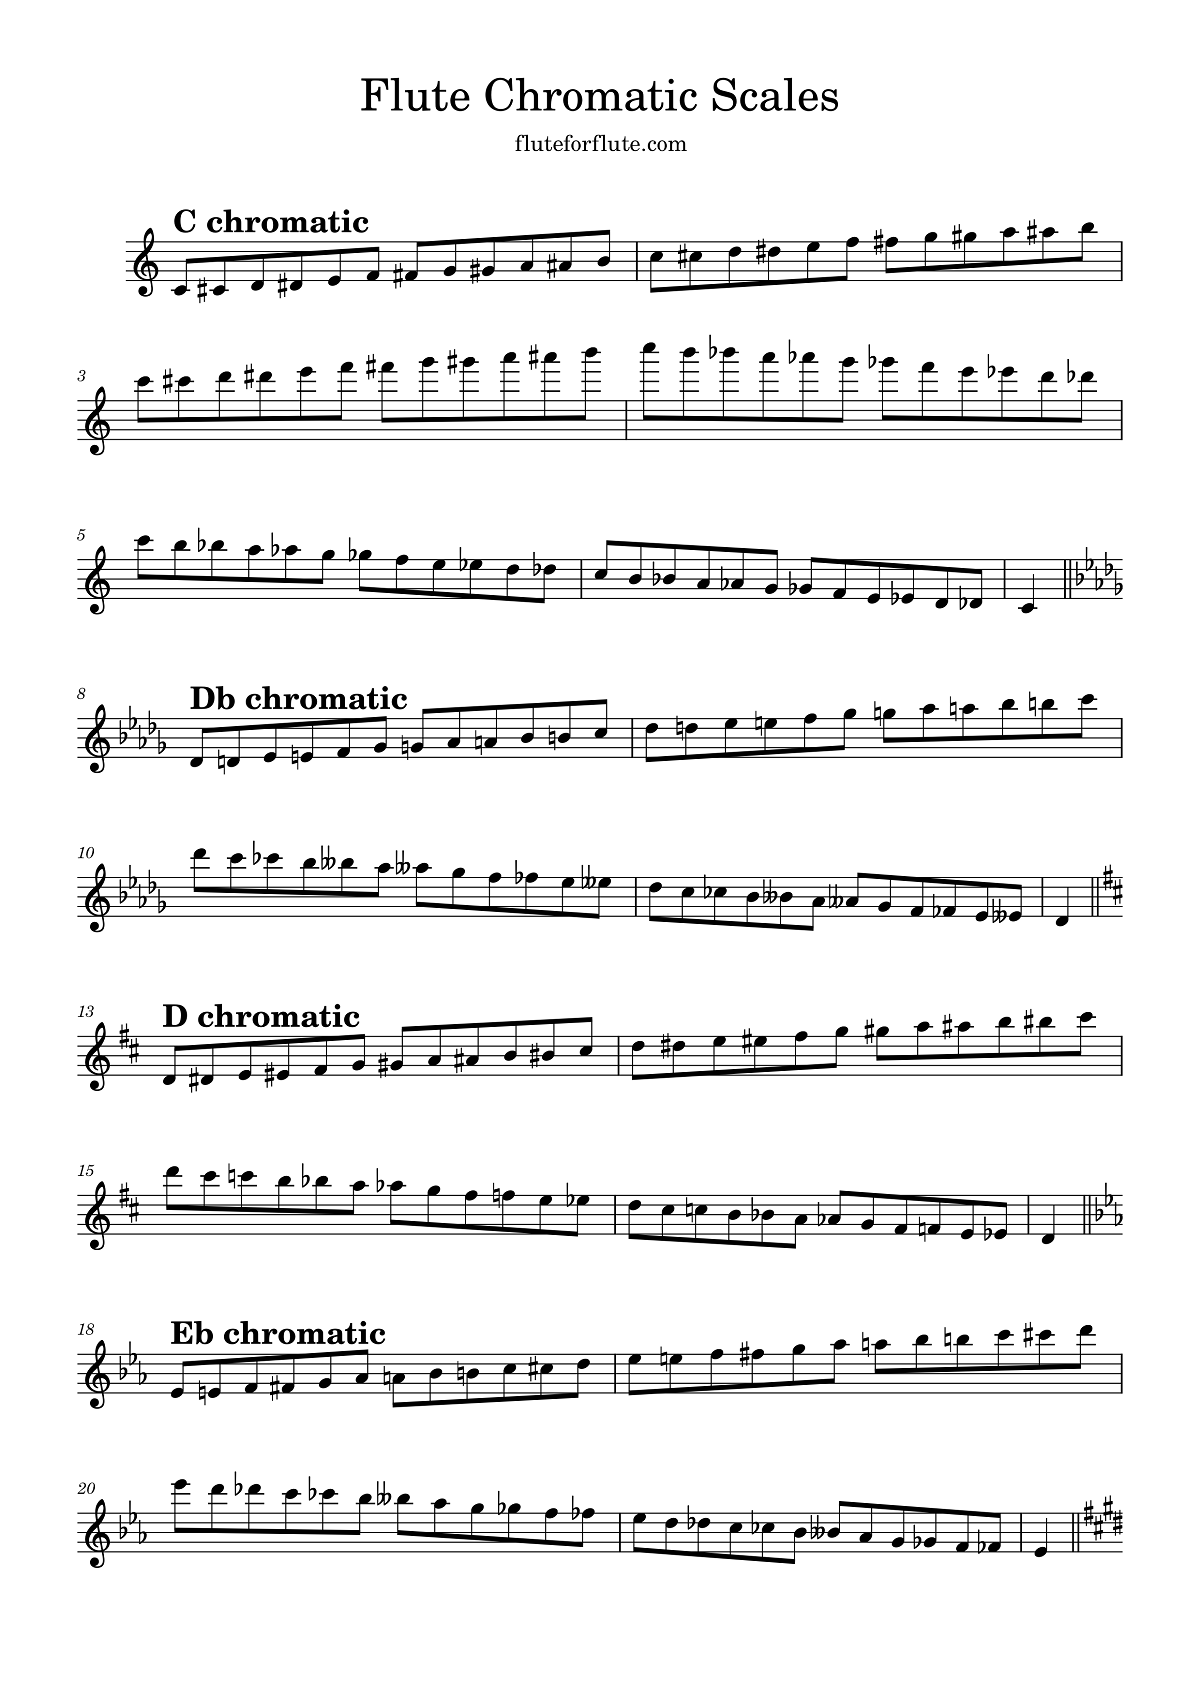 Flute Chromatic Scales